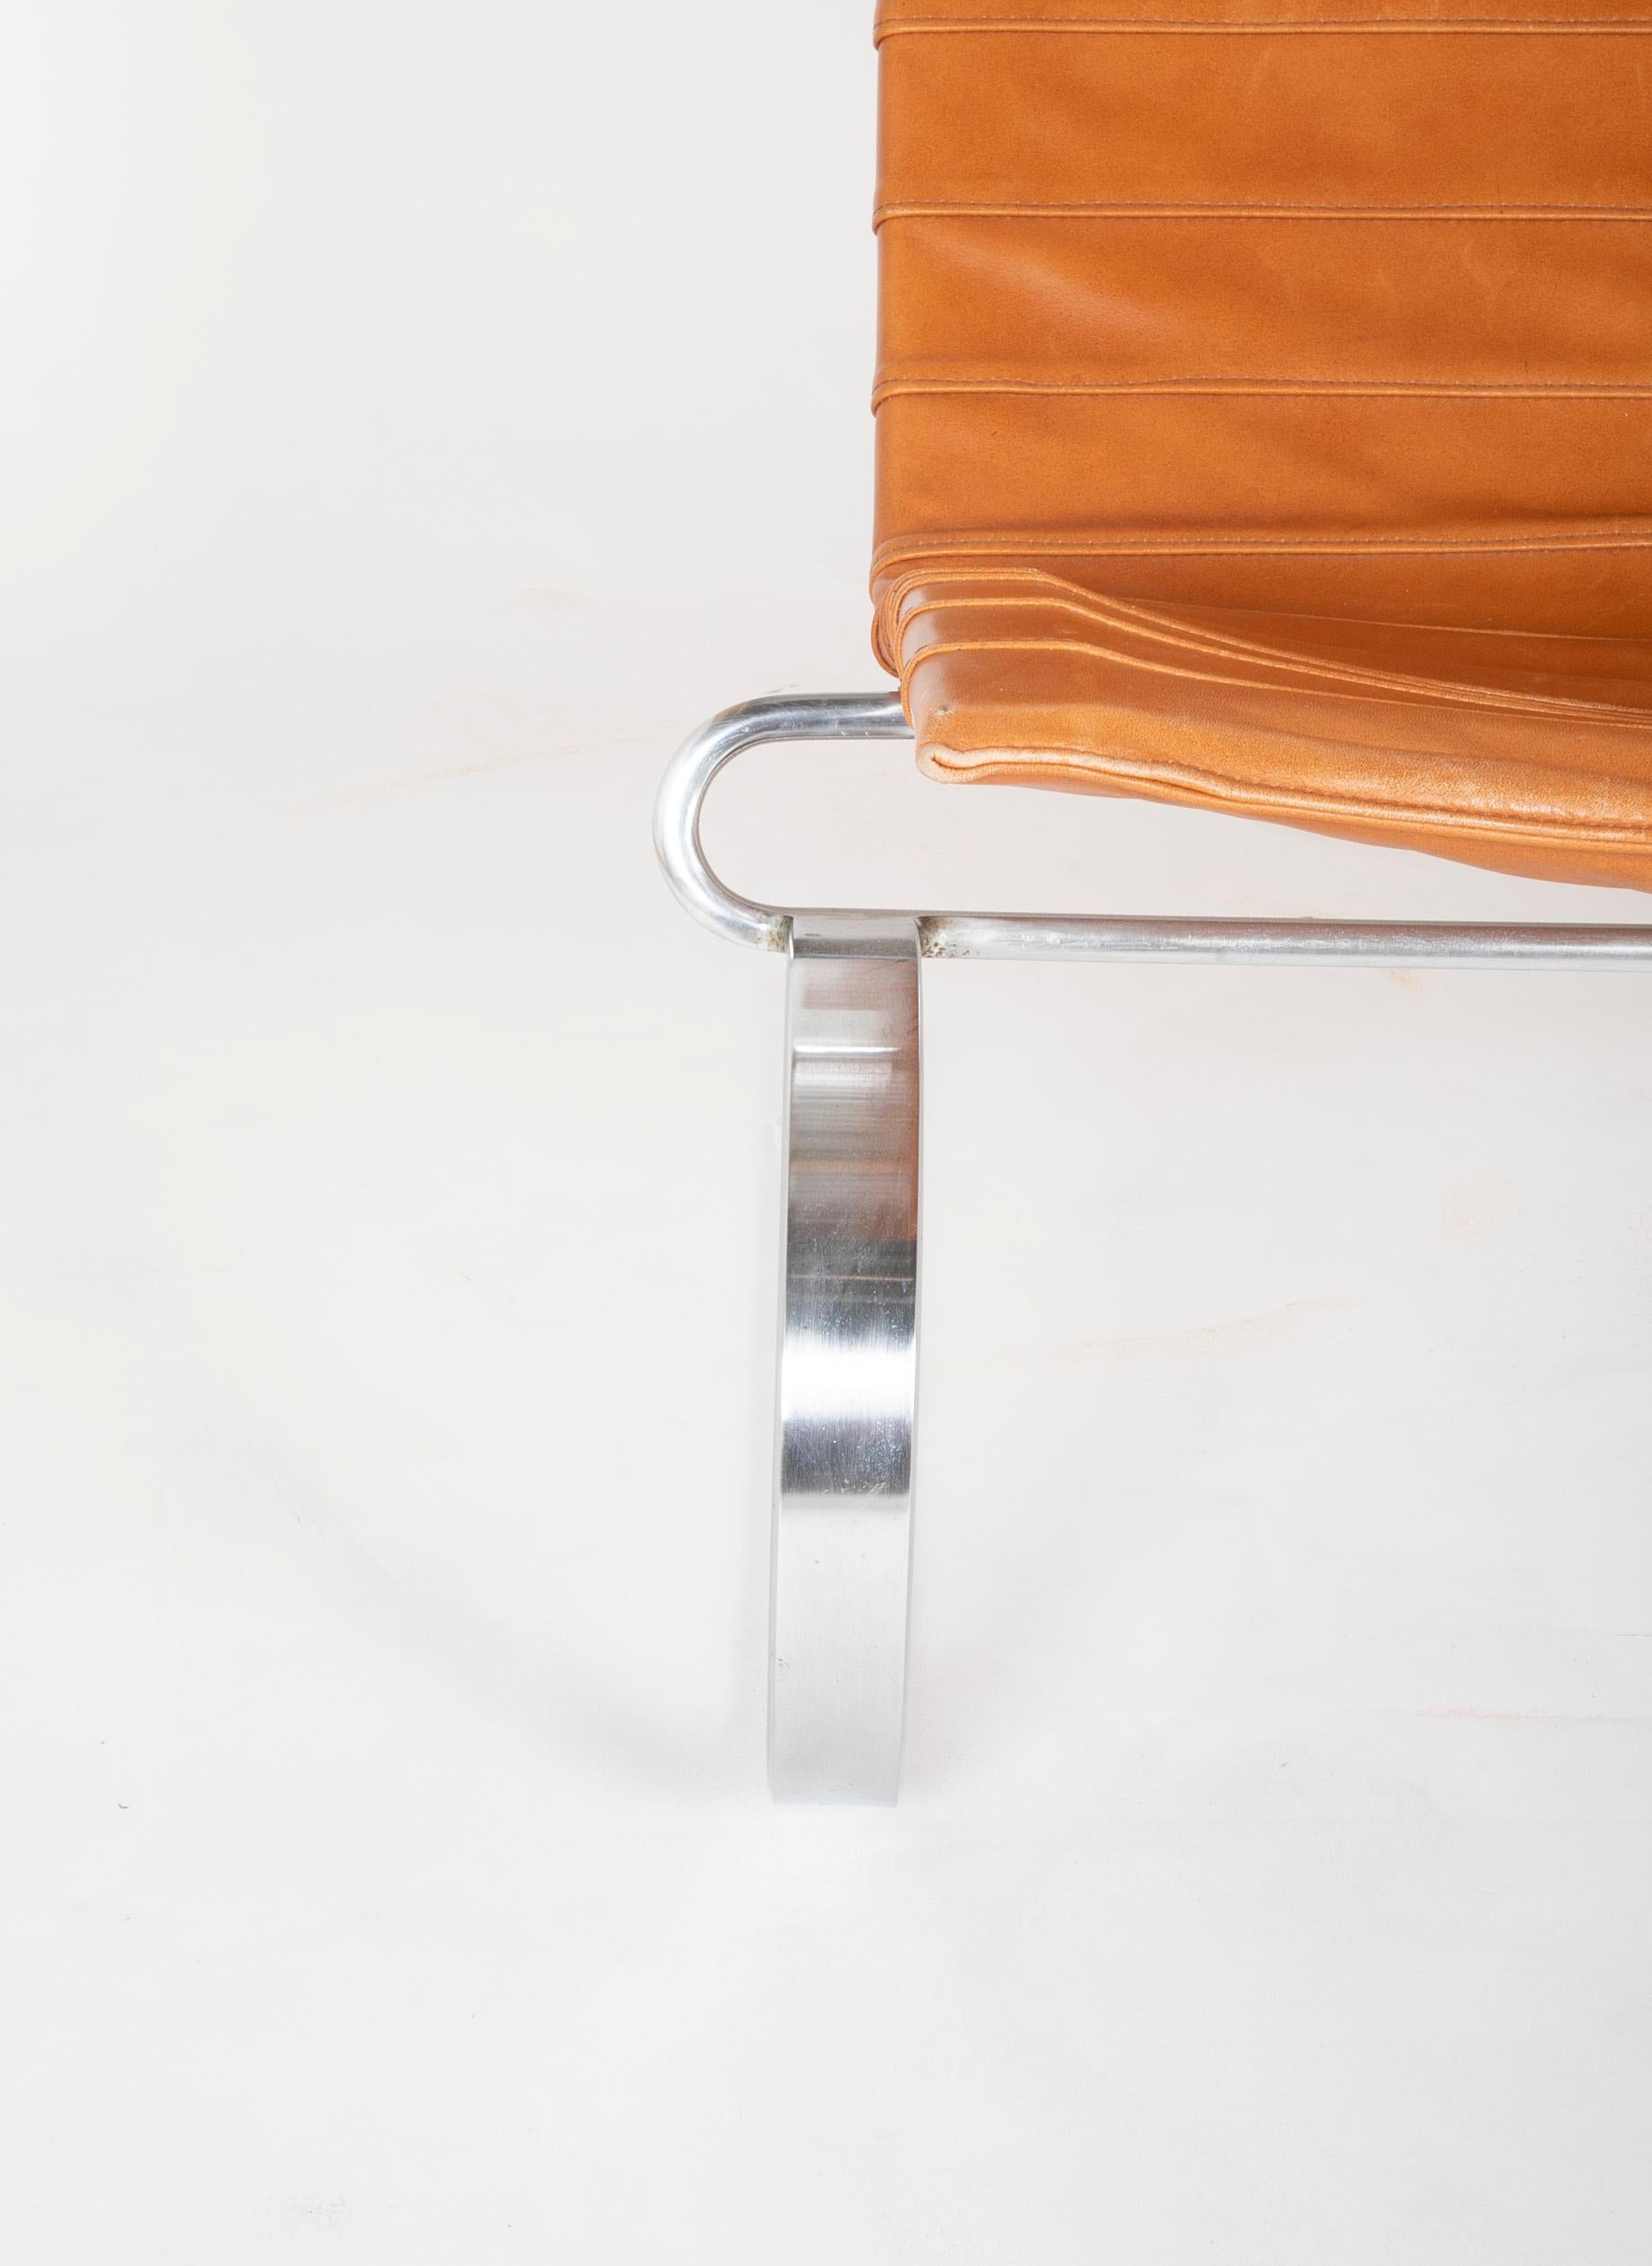 PK20 Easy Chair by Poul Kjaerholm Produced by E. Kold Christensen In Good Condition For Sale In Stamford, CT